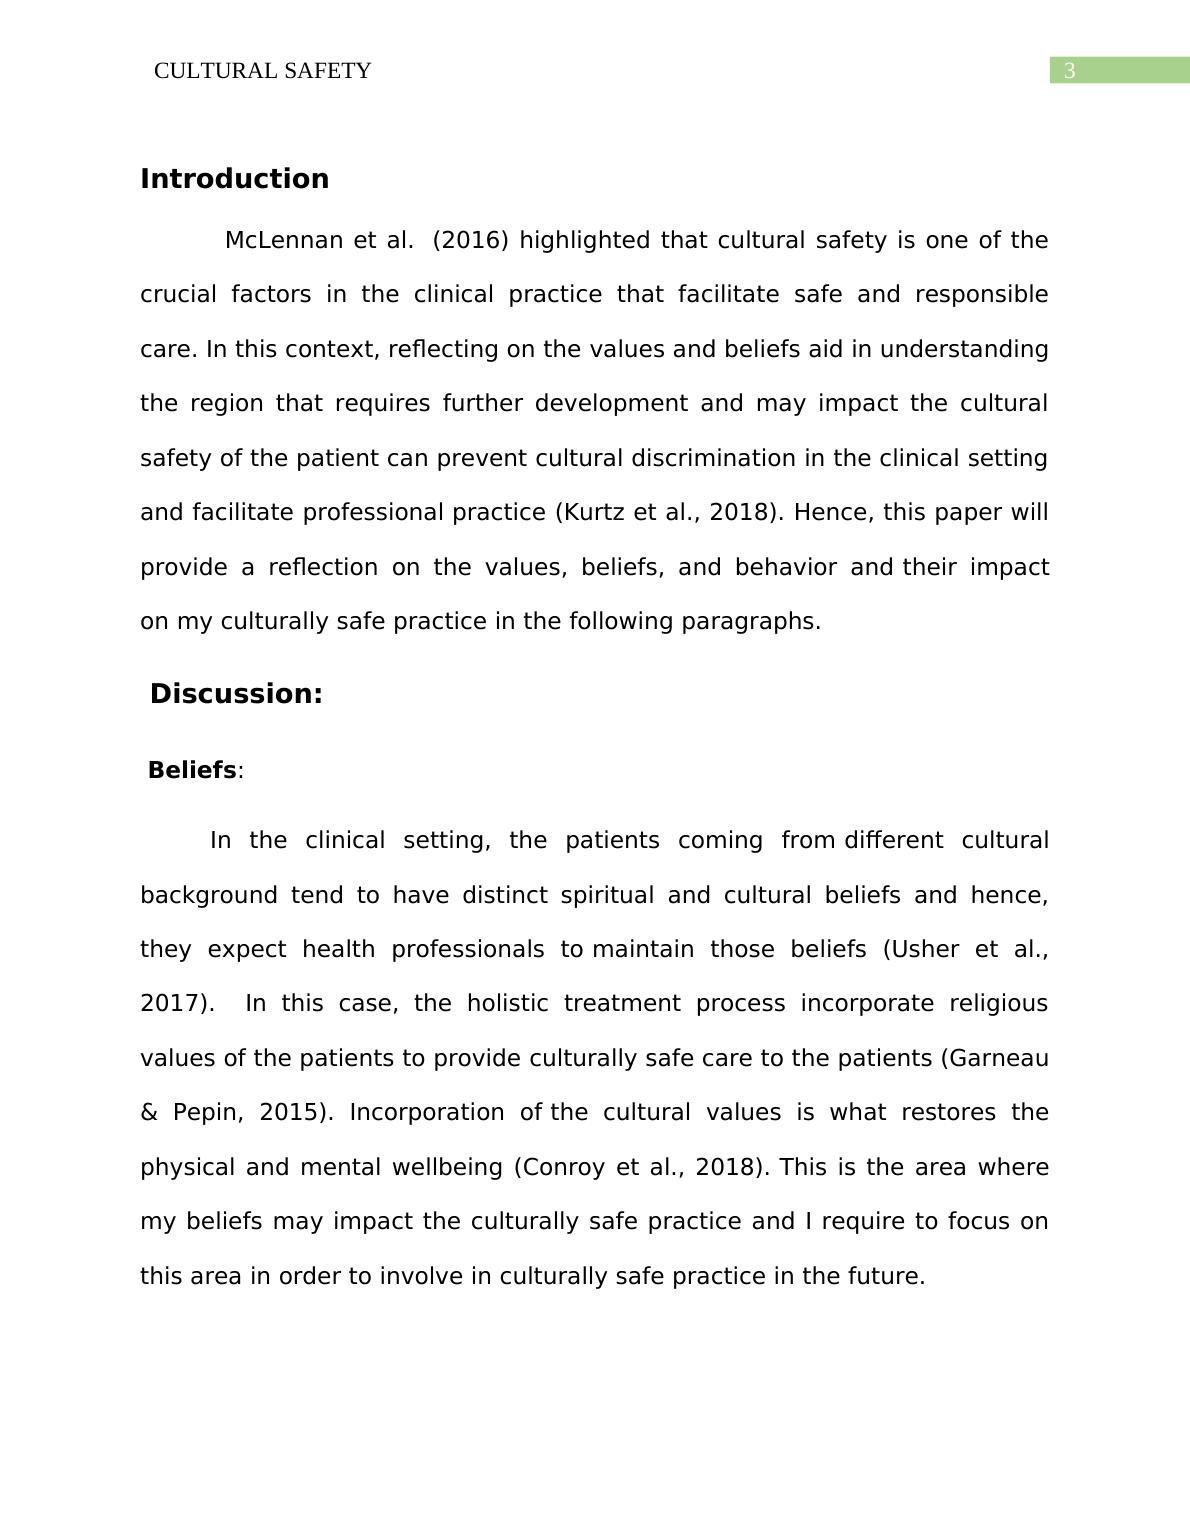 Cultural Safety in Nursing and Healthcare: A Literature Review_3